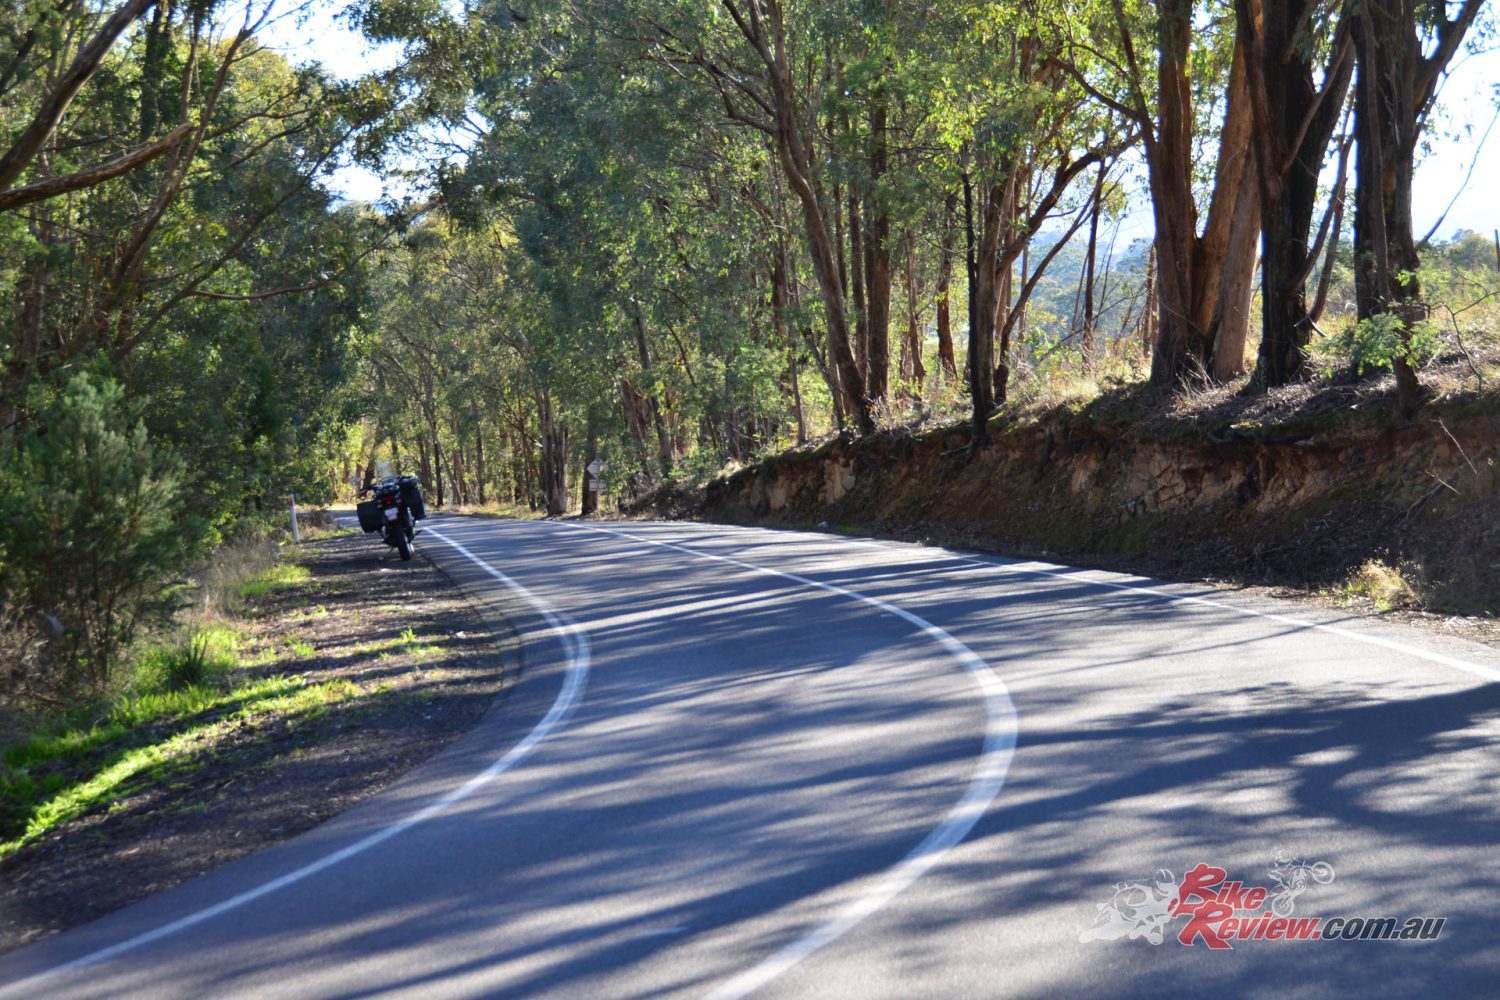 The roads around Chiltern are good, like this one down from Beechworth.